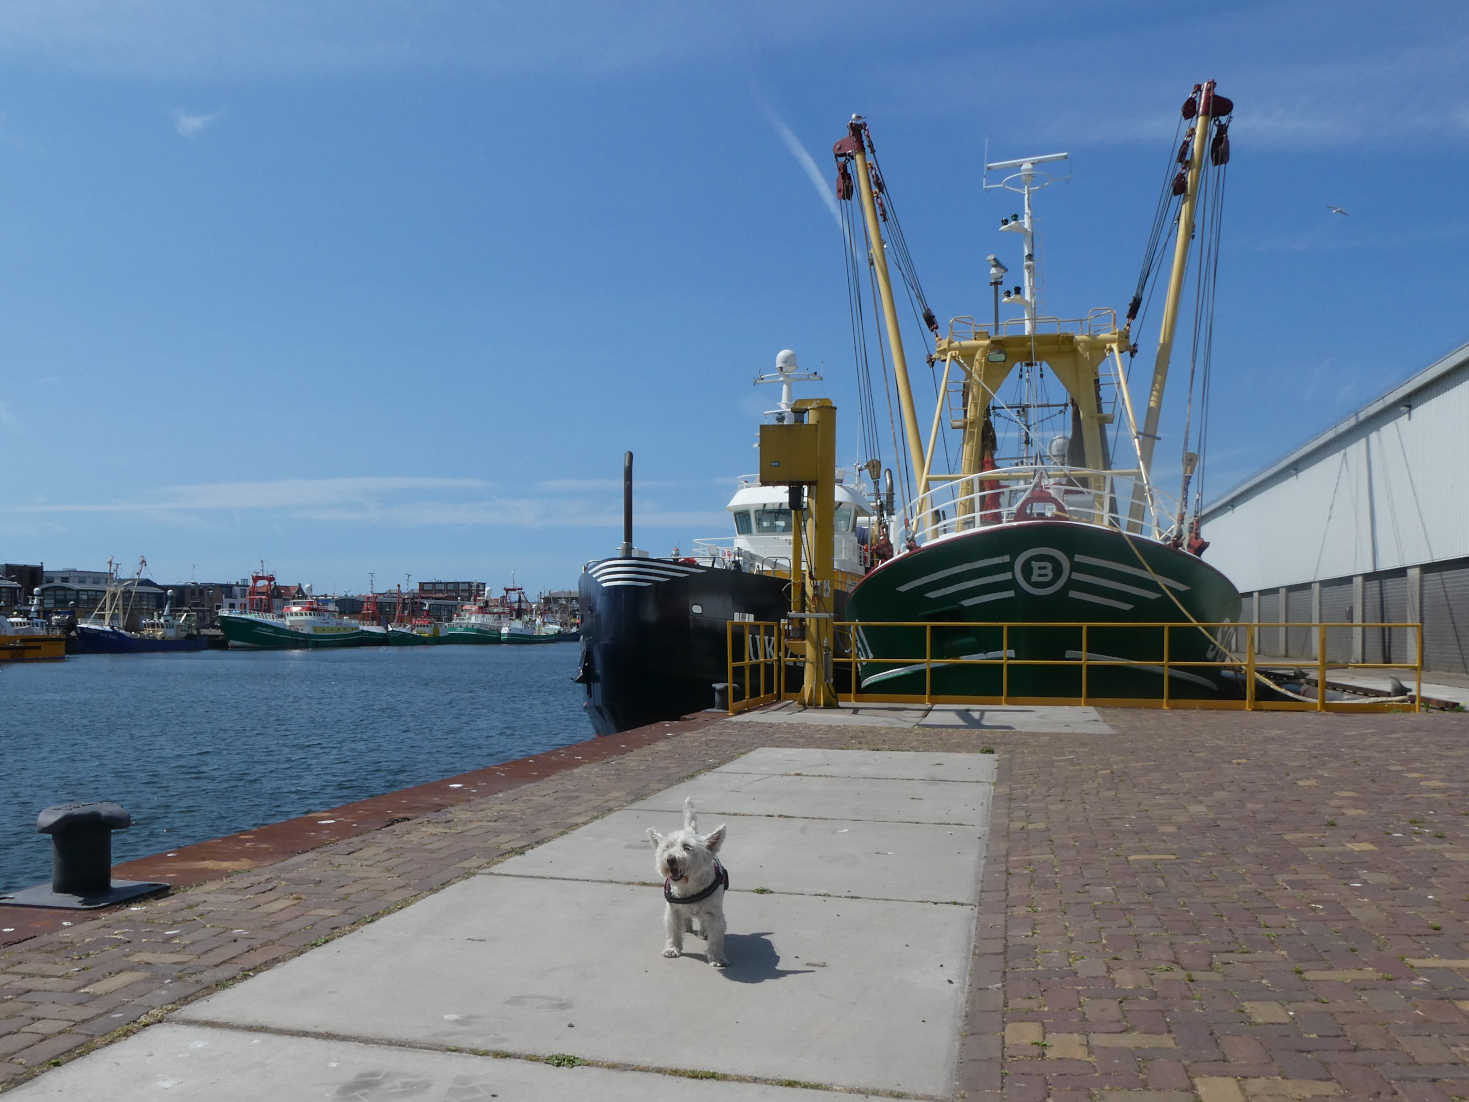 poppy the westie and fishing boats at IJmuiden